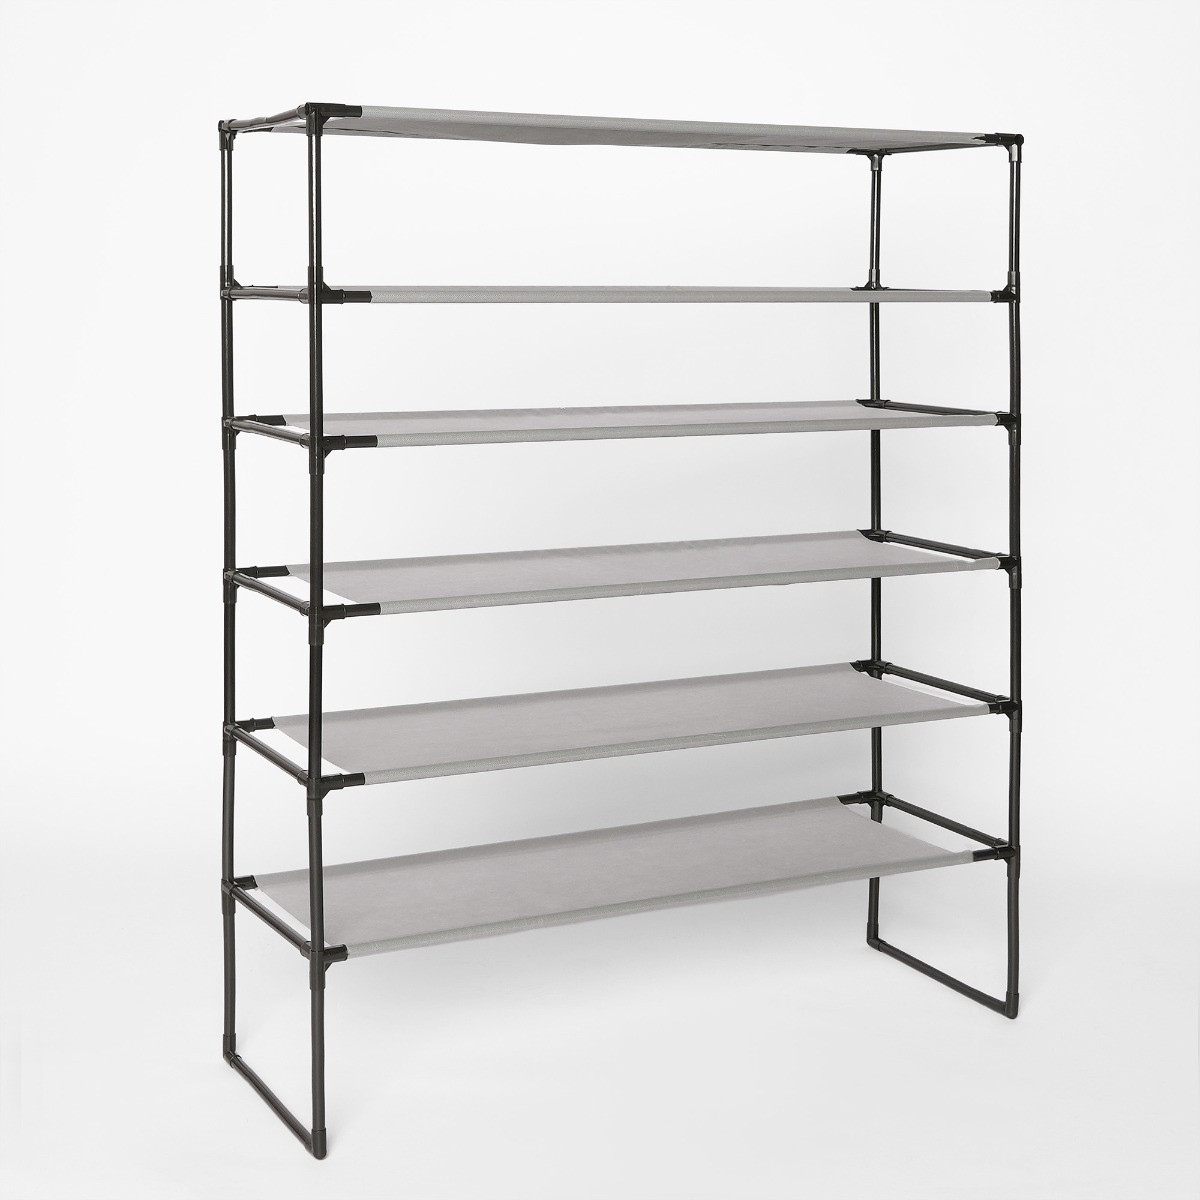 OHS Storage Rack, Charcoal - 6 Tier